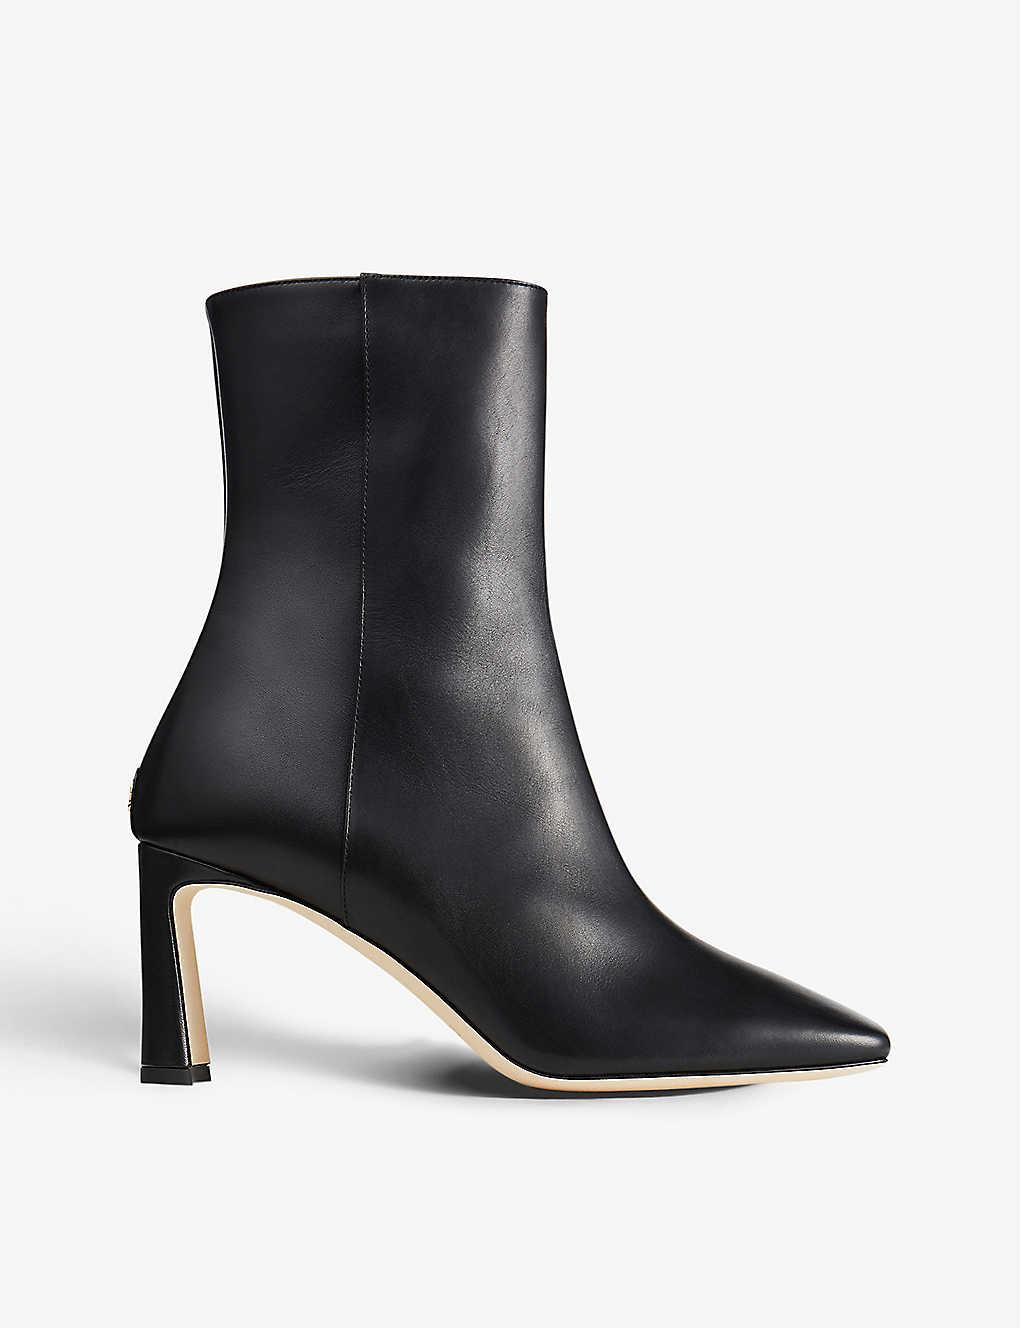 Jimmy Choo Kinsey Square-toe Leather Heeled Ankle Boots in Black | Lyst